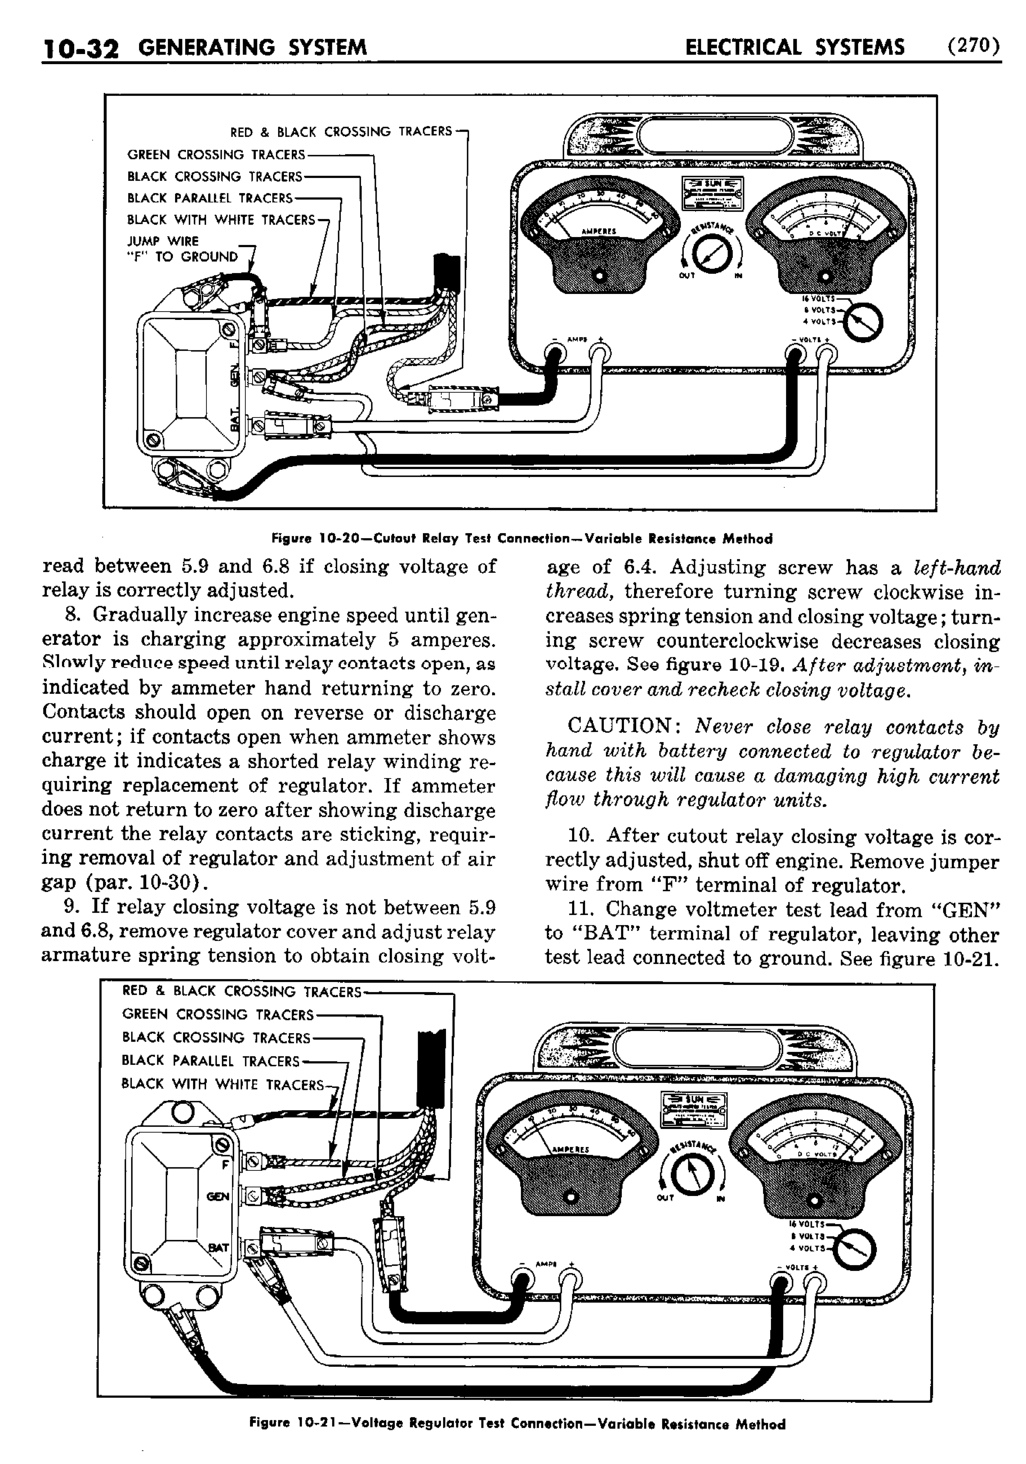 n_11 1950 Buick Shop Manual - Electrical Systems-032-032.jpg